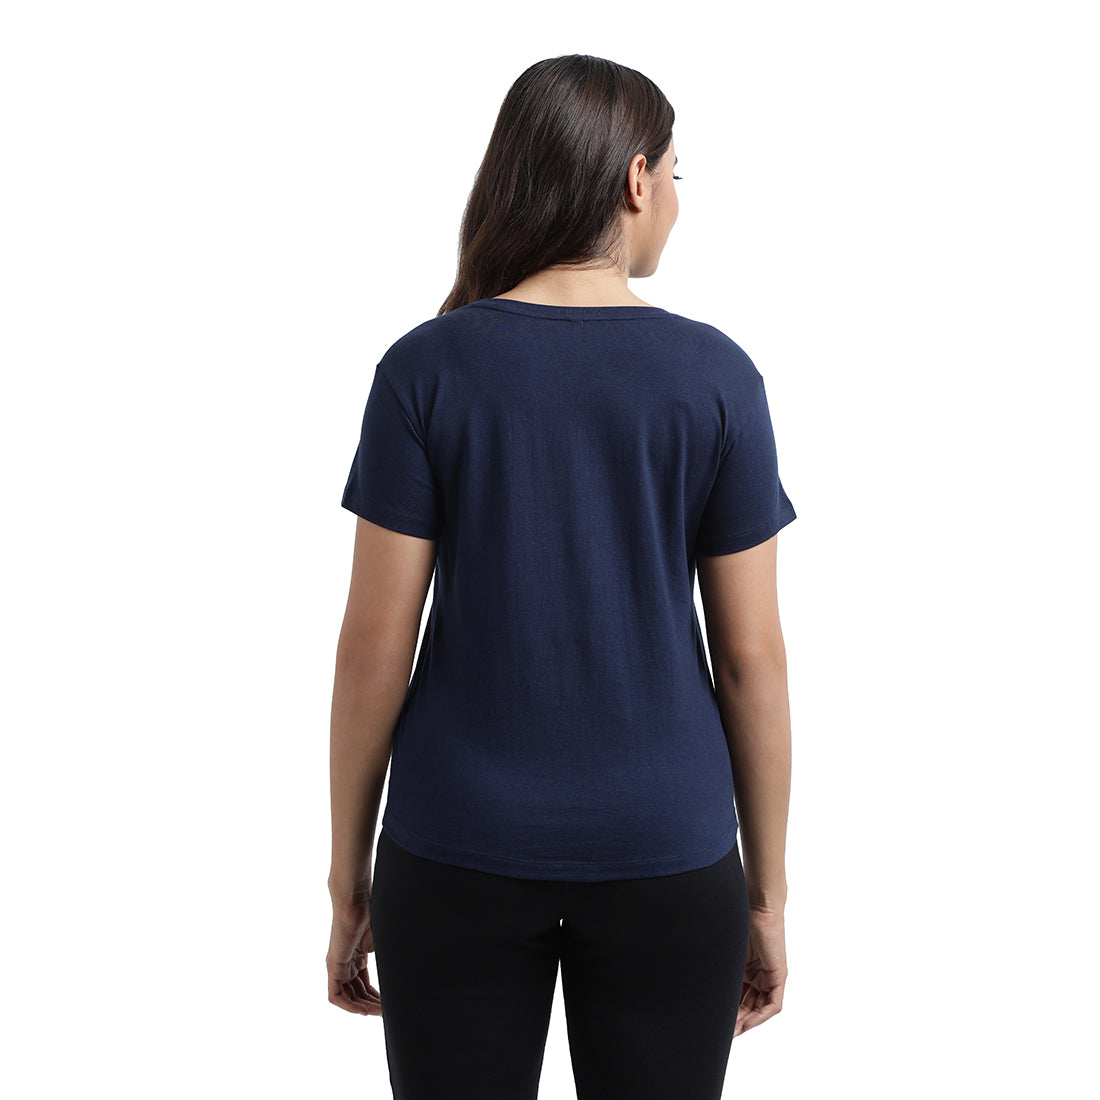 Cotton Workout Tee - Navy Blue - Back Image